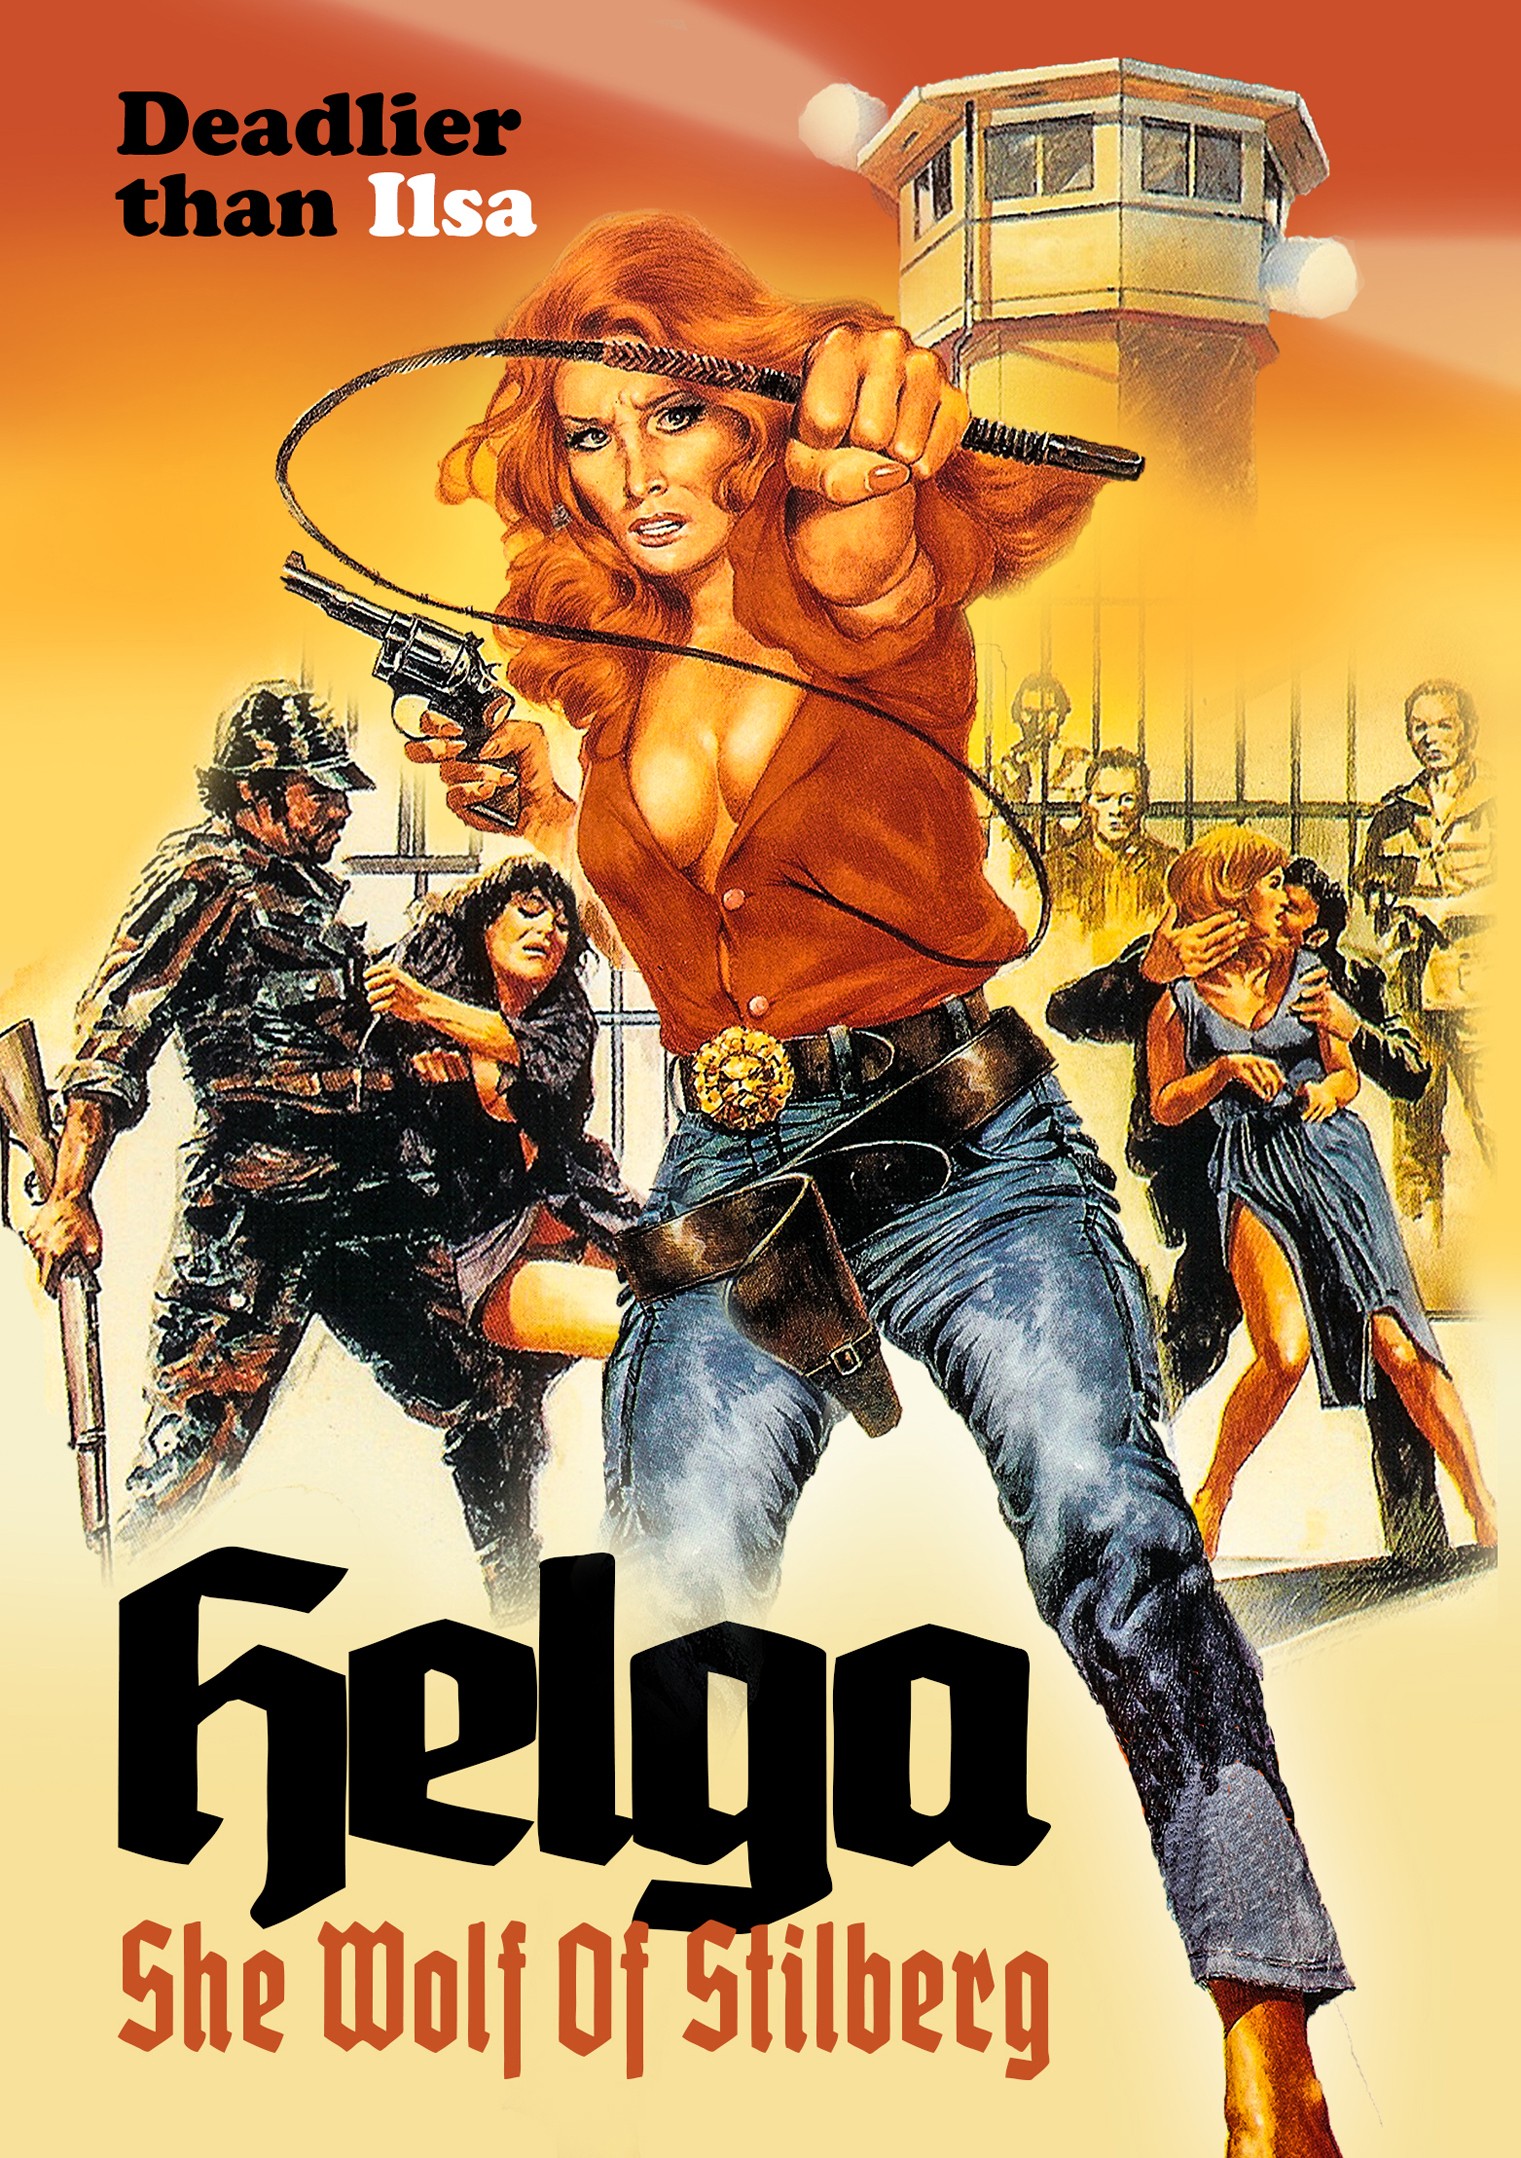 Helga She Wolf of Spilberg (1977) 480p HDRip French Adult Movie [300MB]